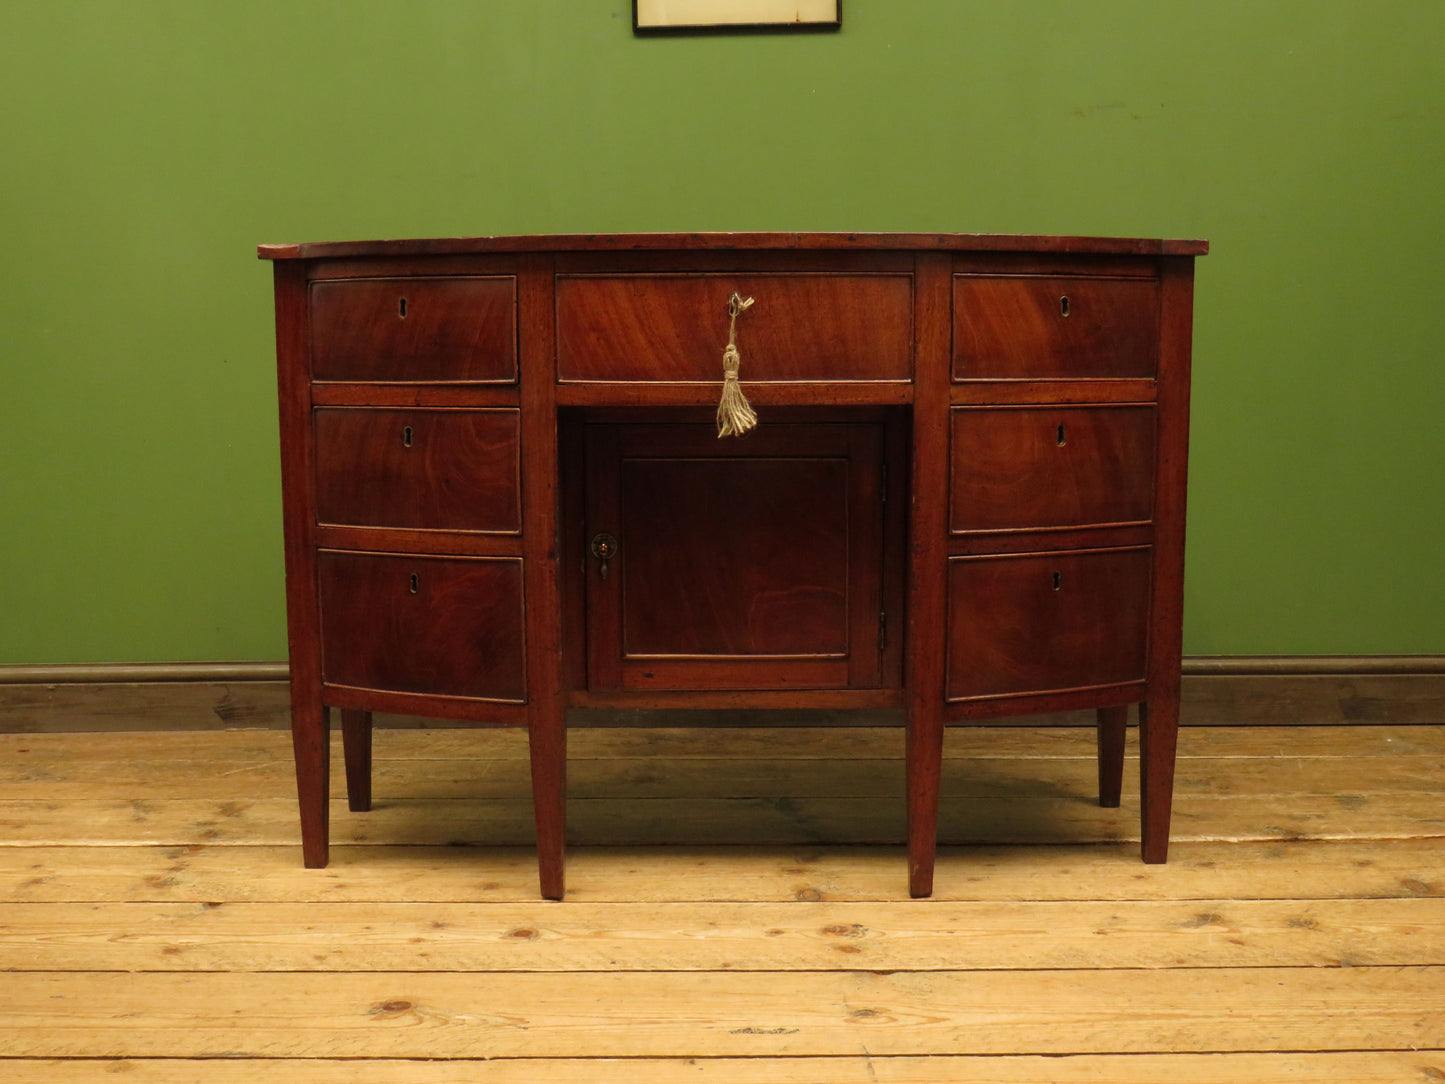 Bow Front Sideboard with Drawers